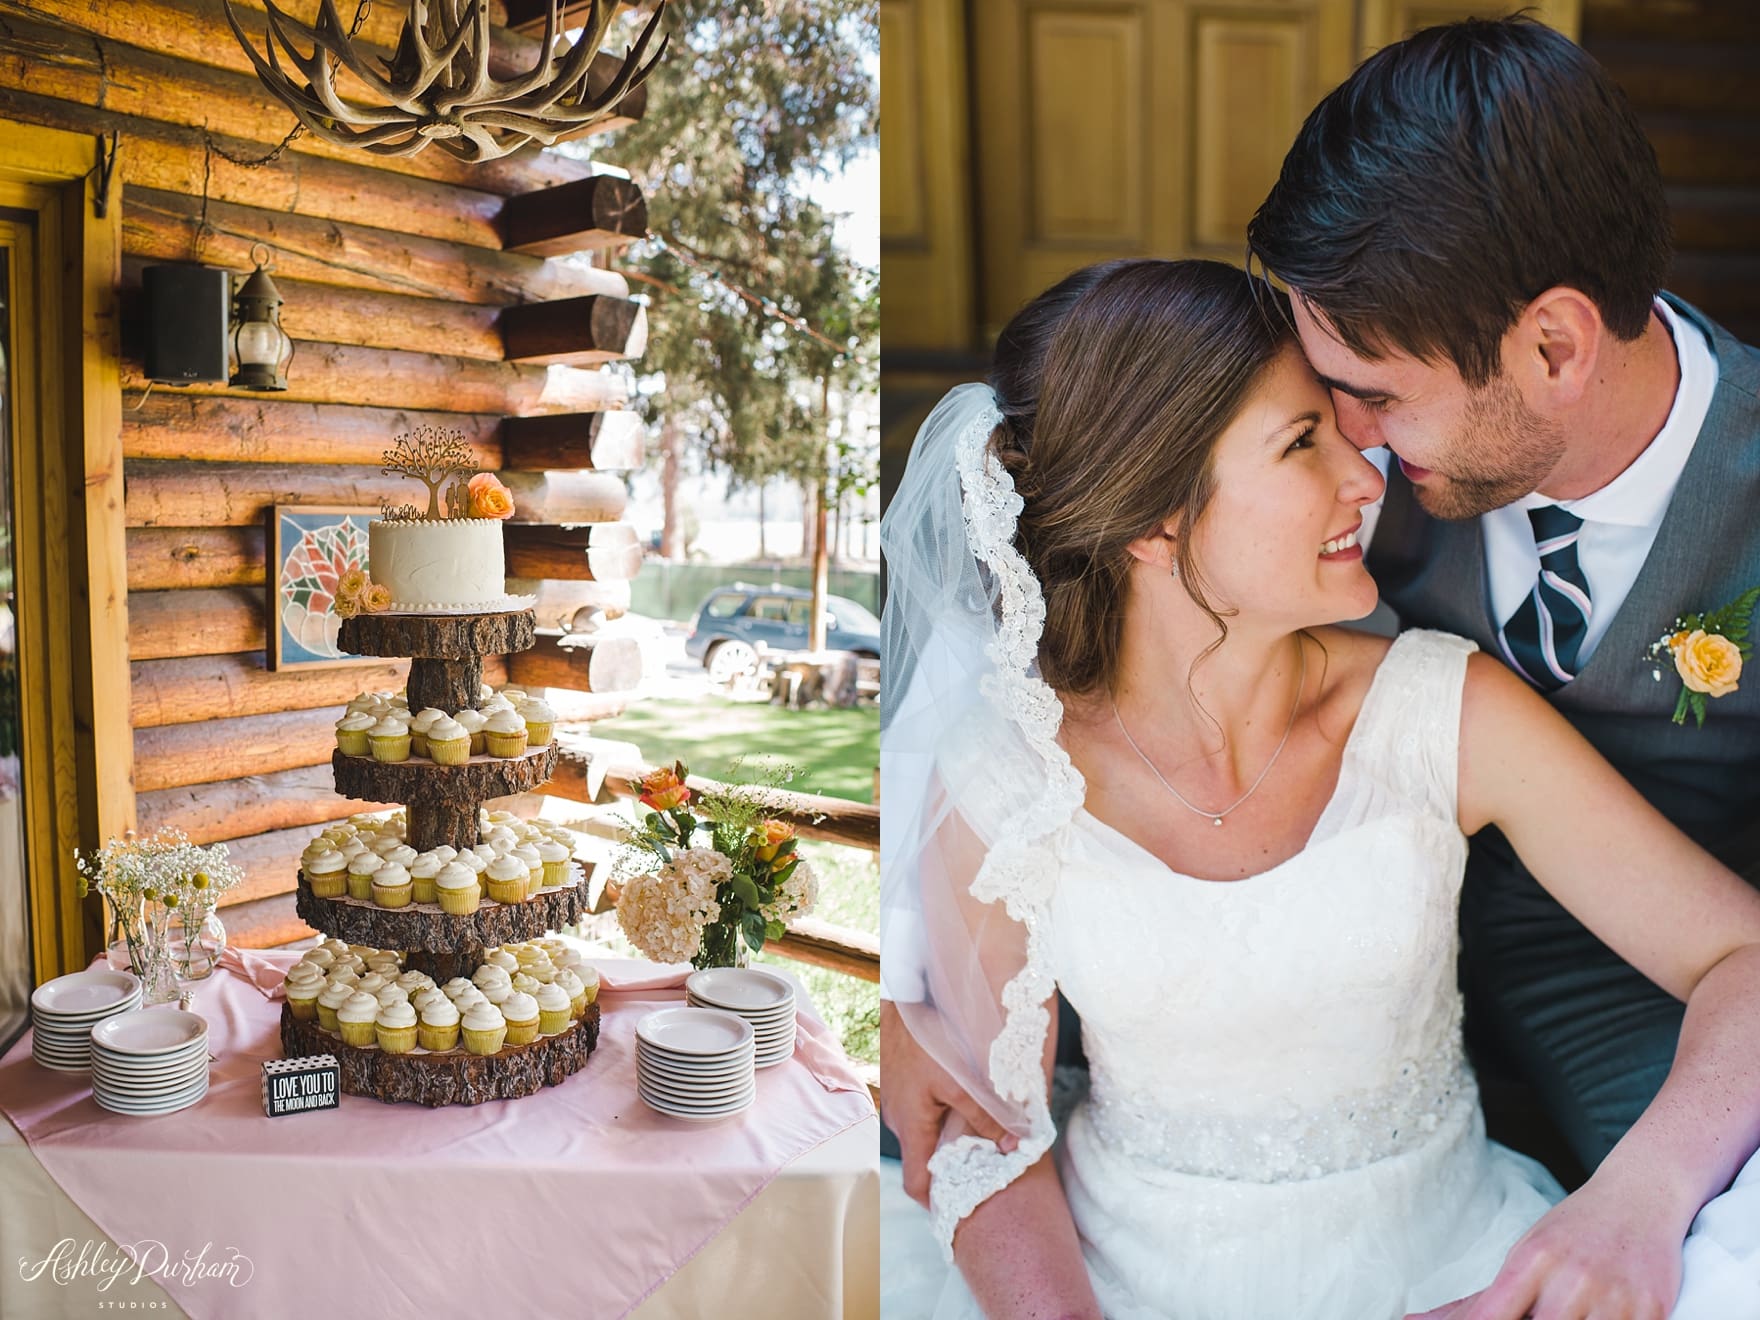 Inn at Fawnskin Wedding, Fawnksin Wedding, Big Bear Lake Wedding, cake cutting, lemon wedding cake, rustic wedding cake picture, cake stand made of wood, cake stand made from a tree